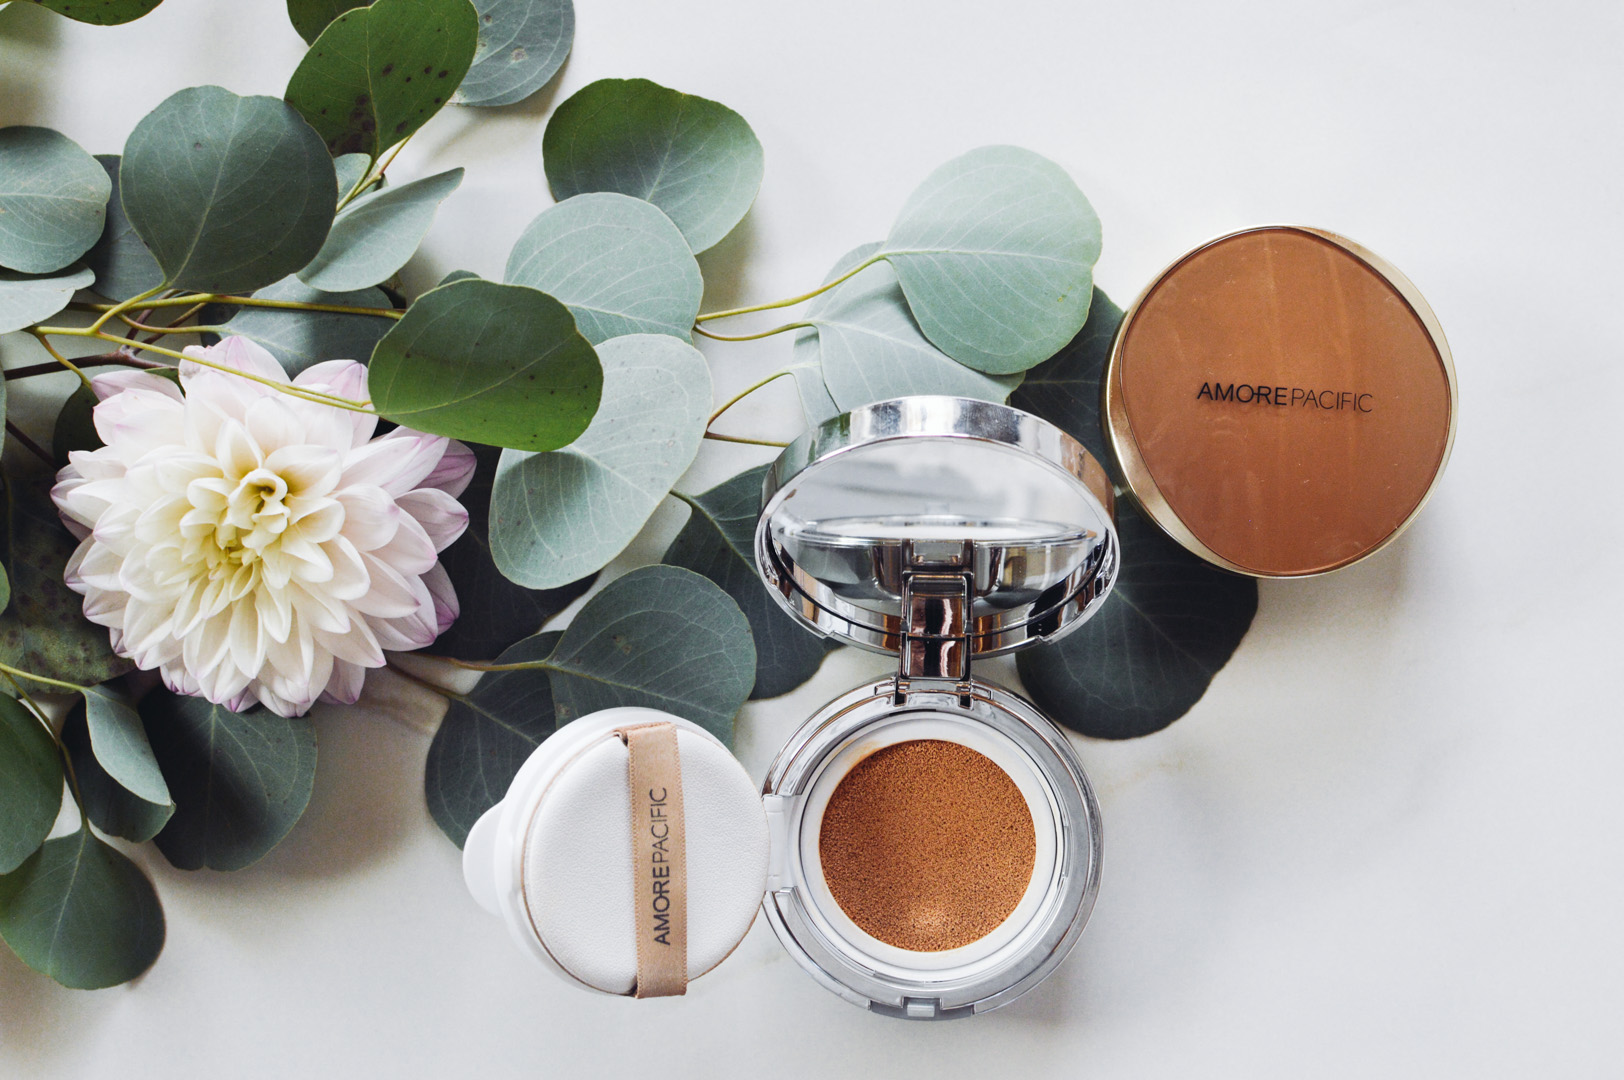 AMOREPACIFIC 'Color Control' Cushion Compact Broad Spectrum SPF 50